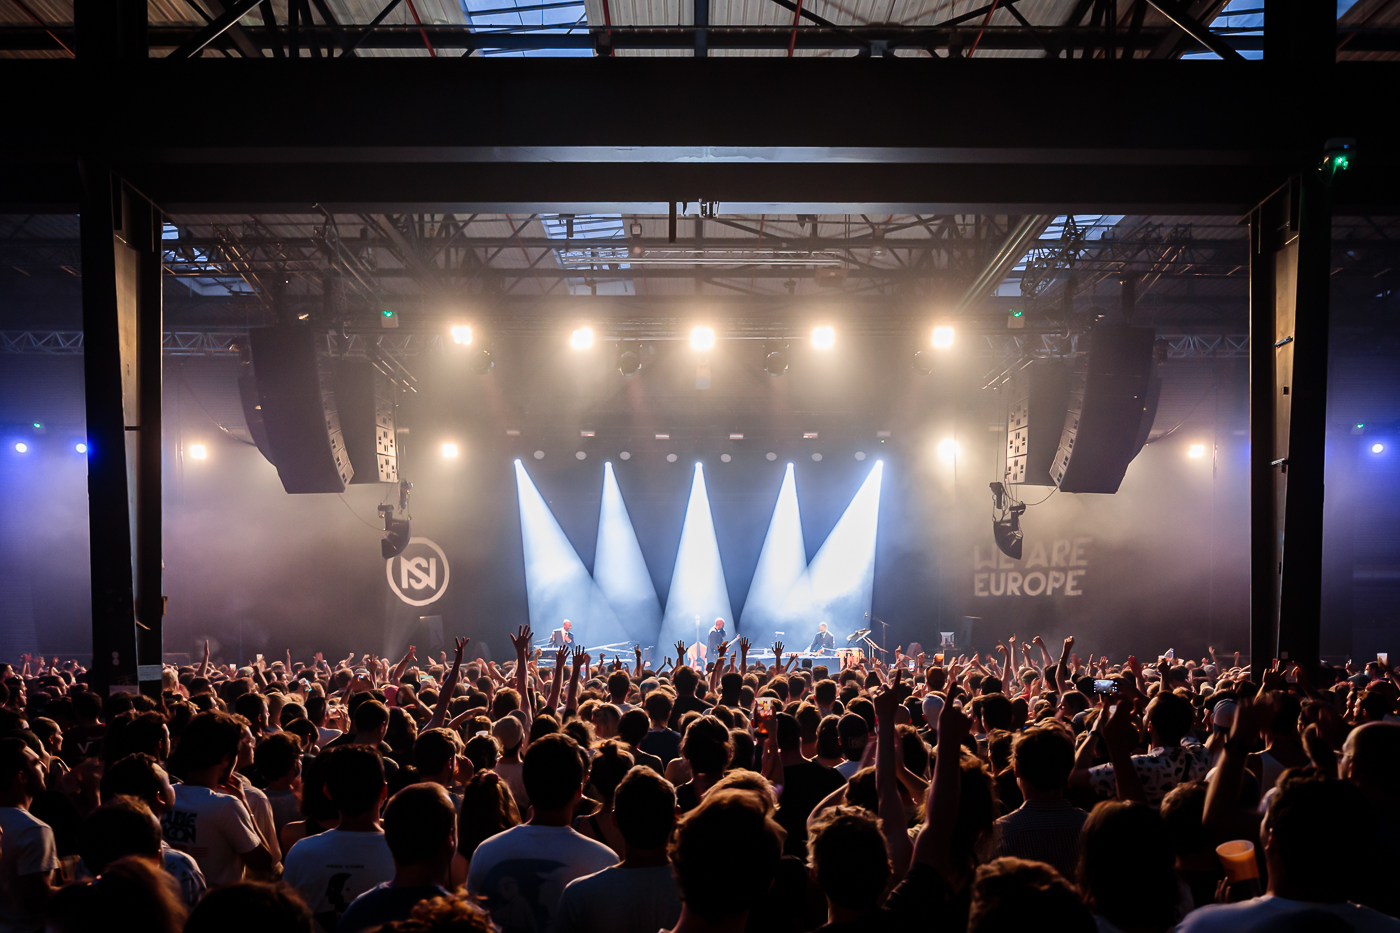 Nuits sonores lyon